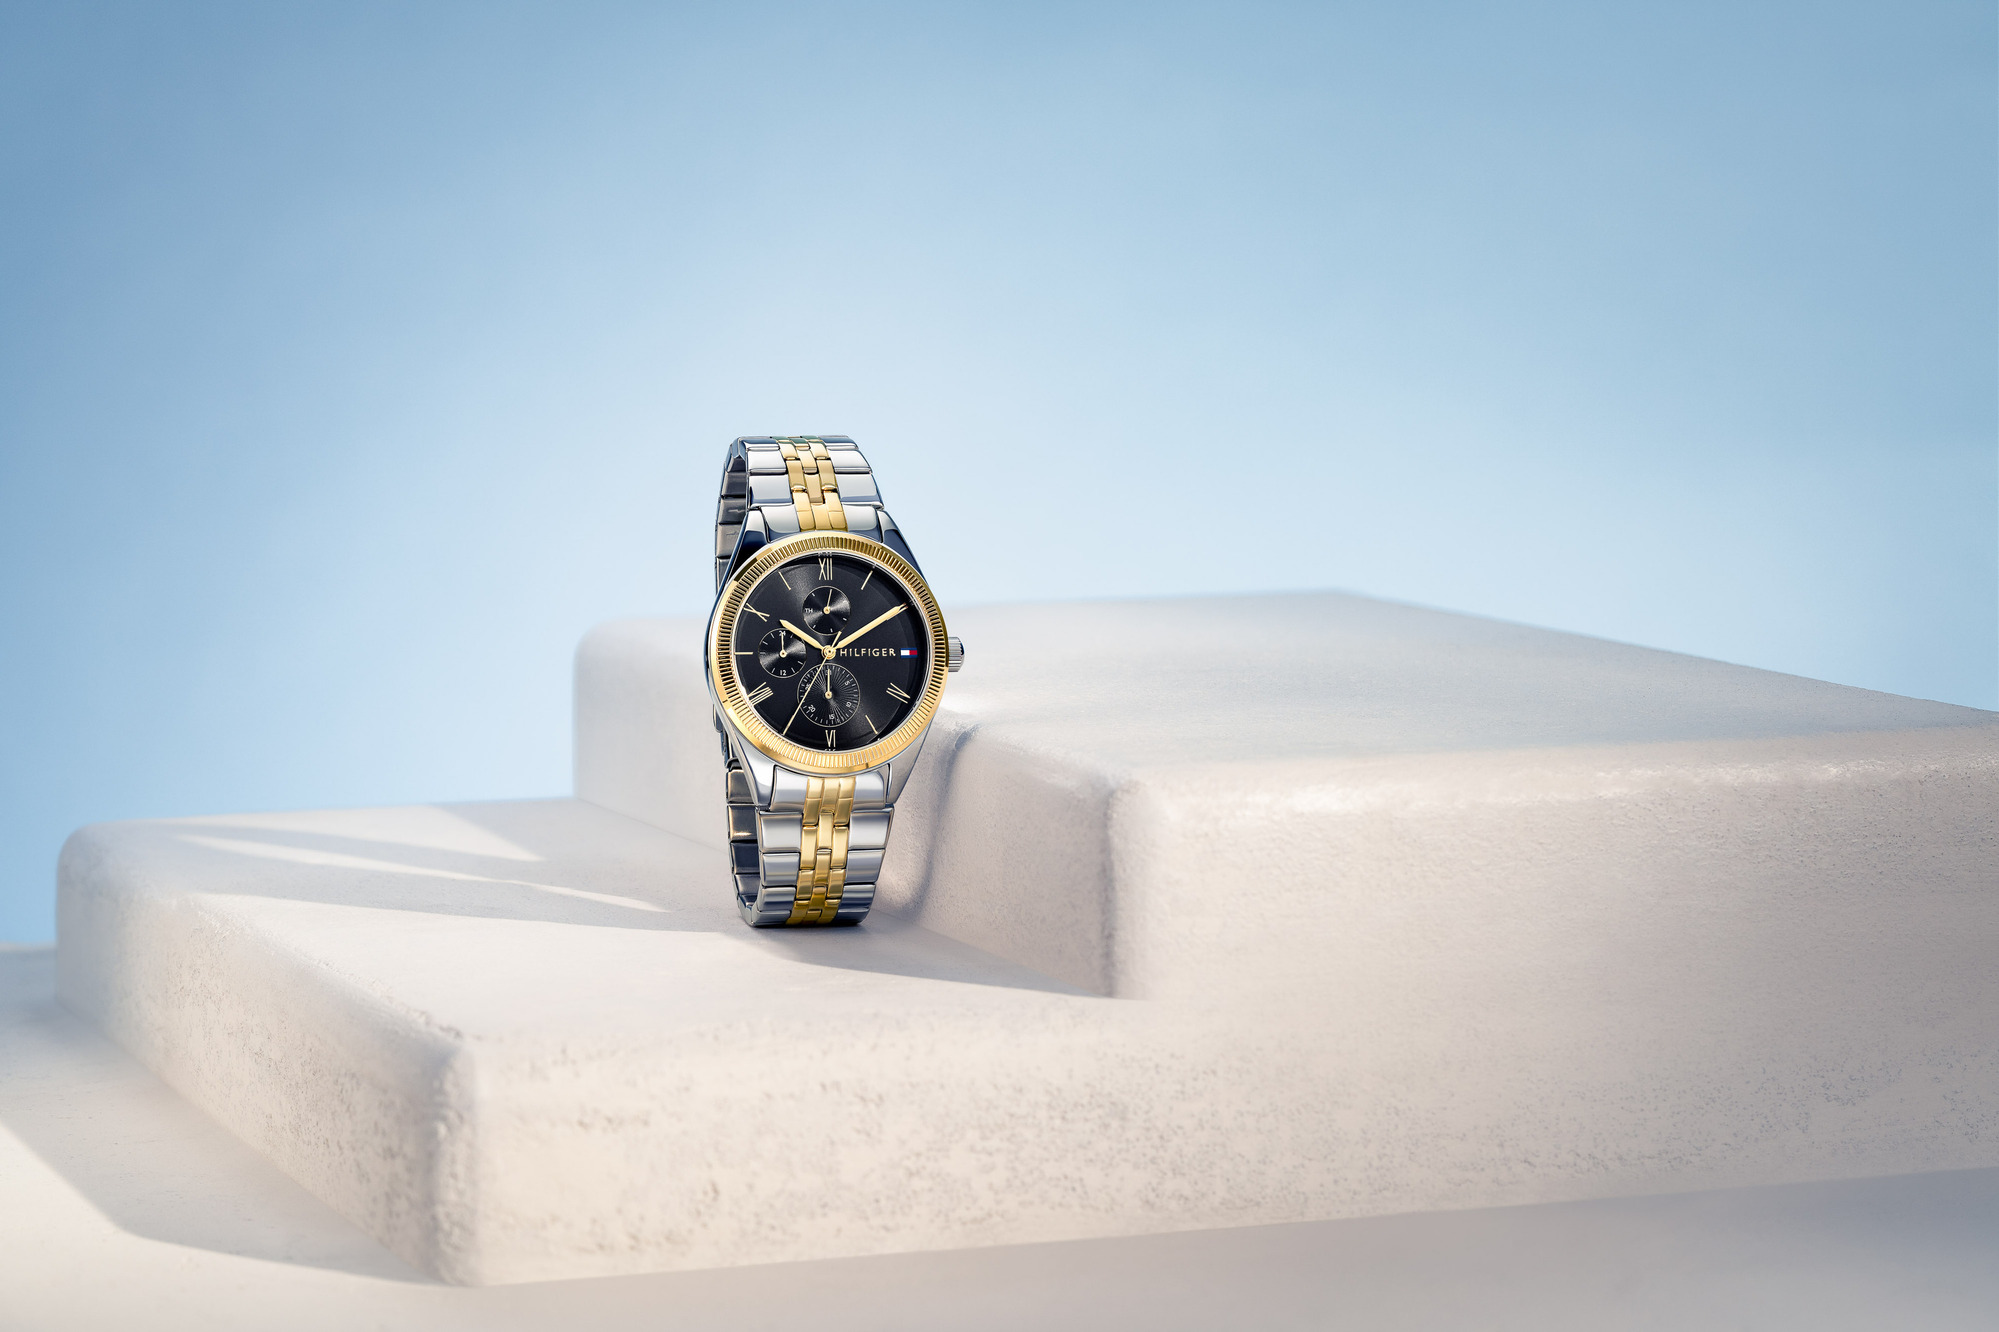 Timepiece and watch advertising photography by commercial photographer Timothy Hogan in Los Angeles, Chicago and New York.